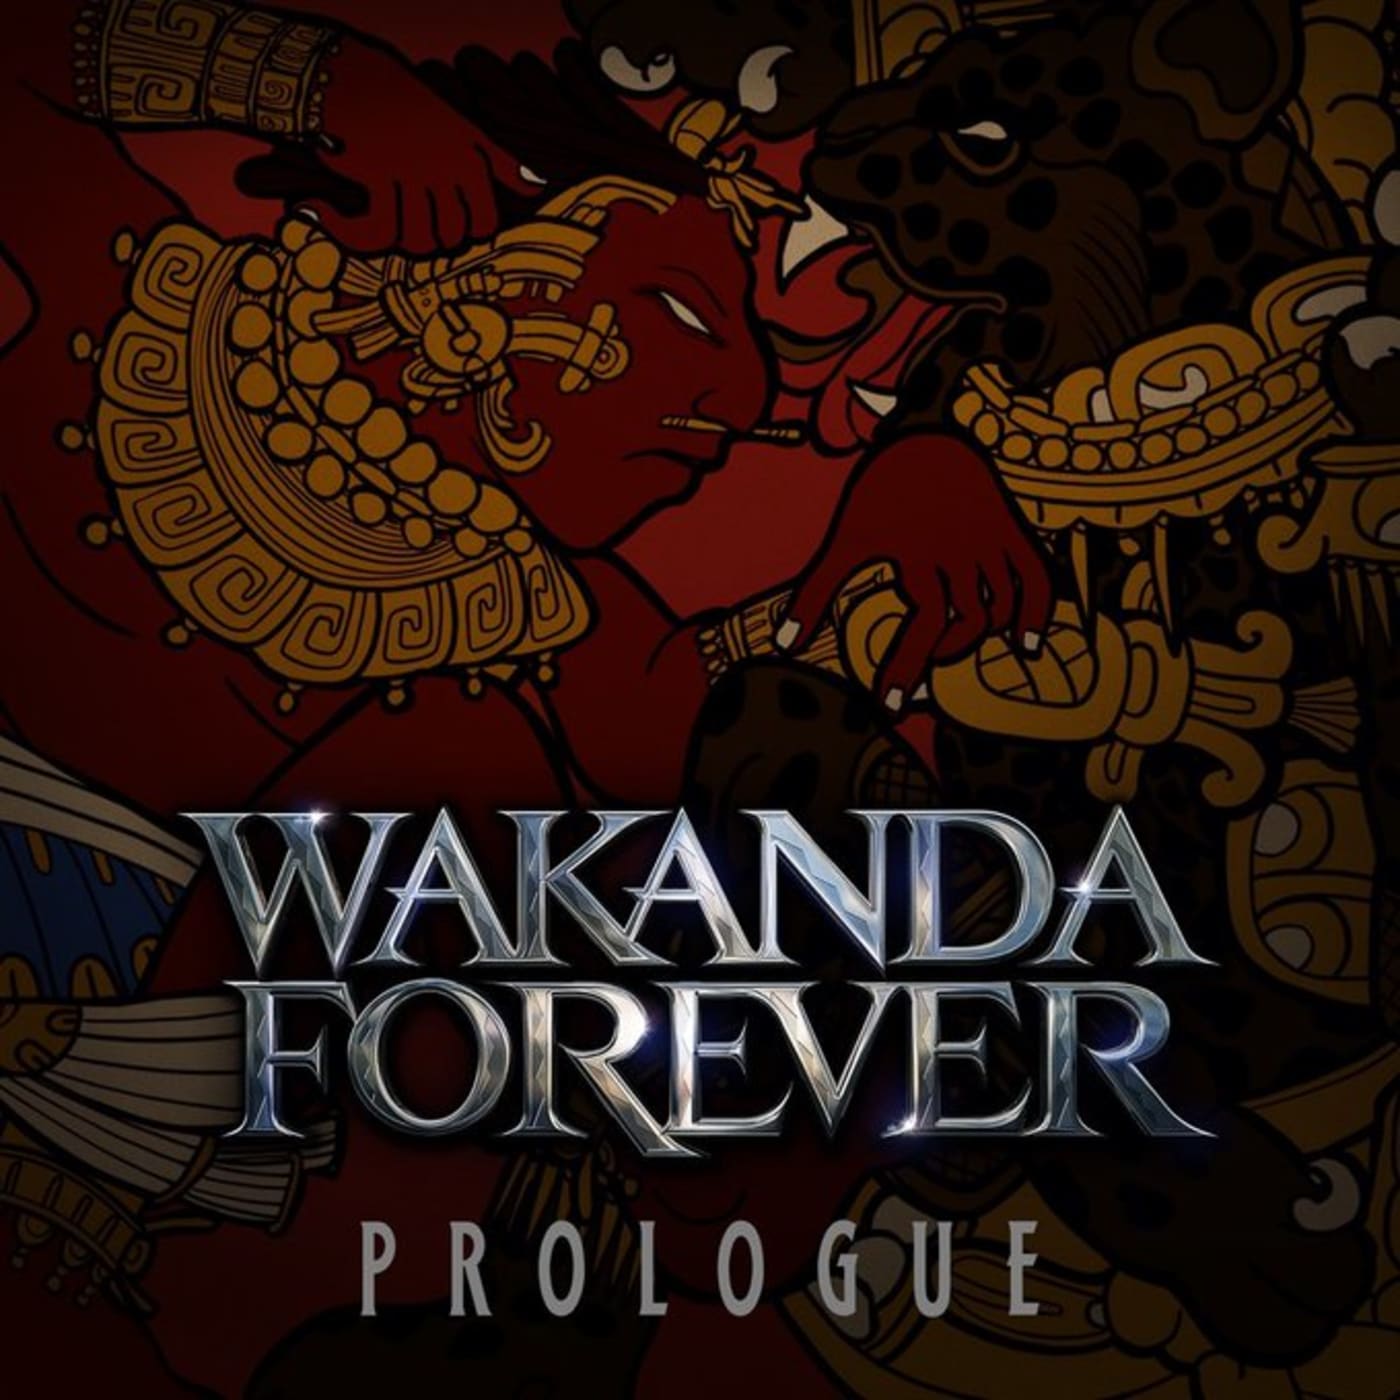 Cover art for Wakanda Forever EP is pictured